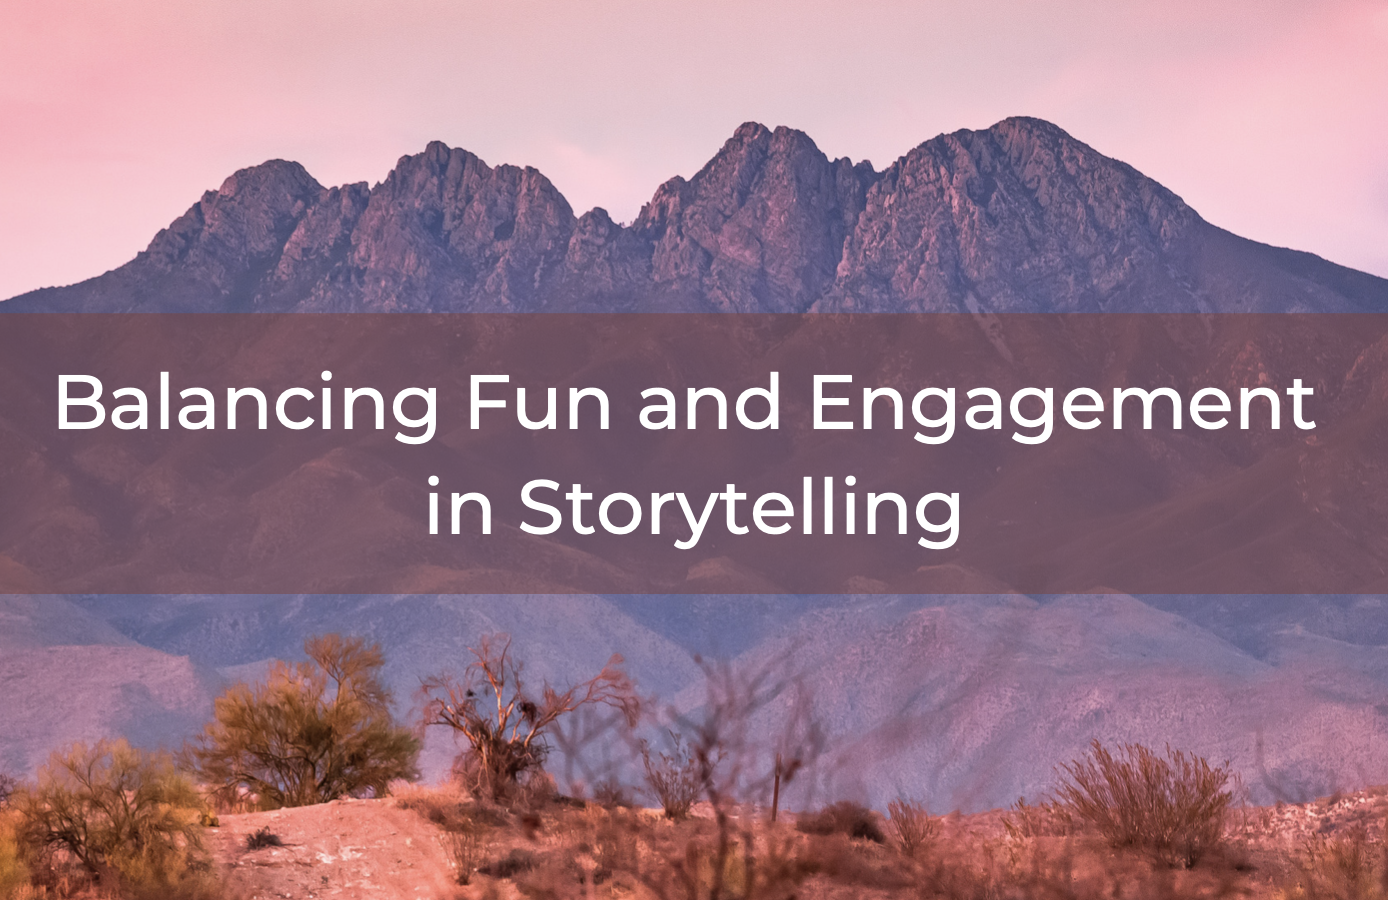 Text Reads: Balancing Fun and Engagement in Storytelling